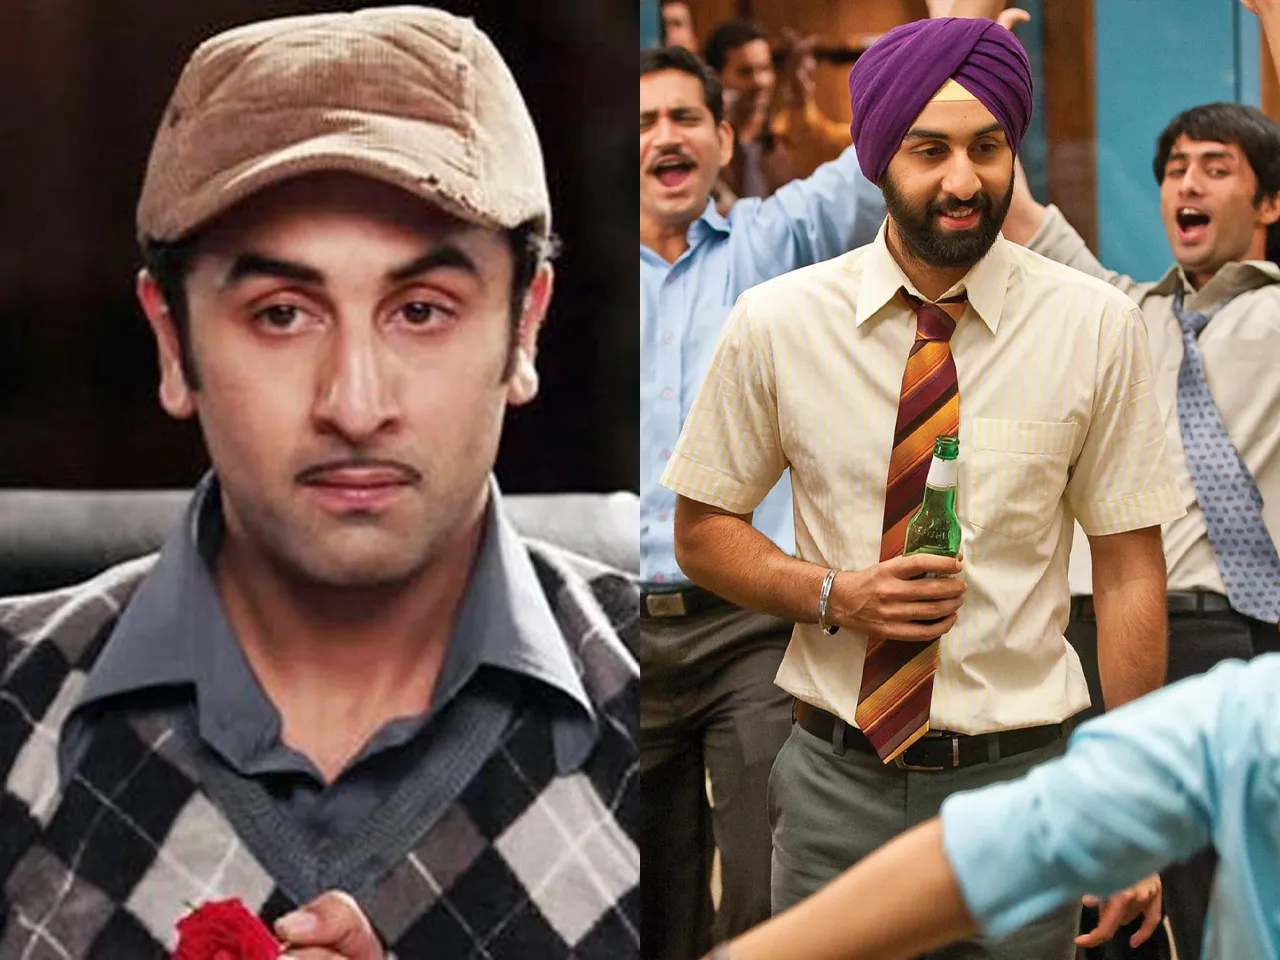 While a new Ranbir era has begun, here’s the Ranbir Kapoor we truly miss and fell in love with!